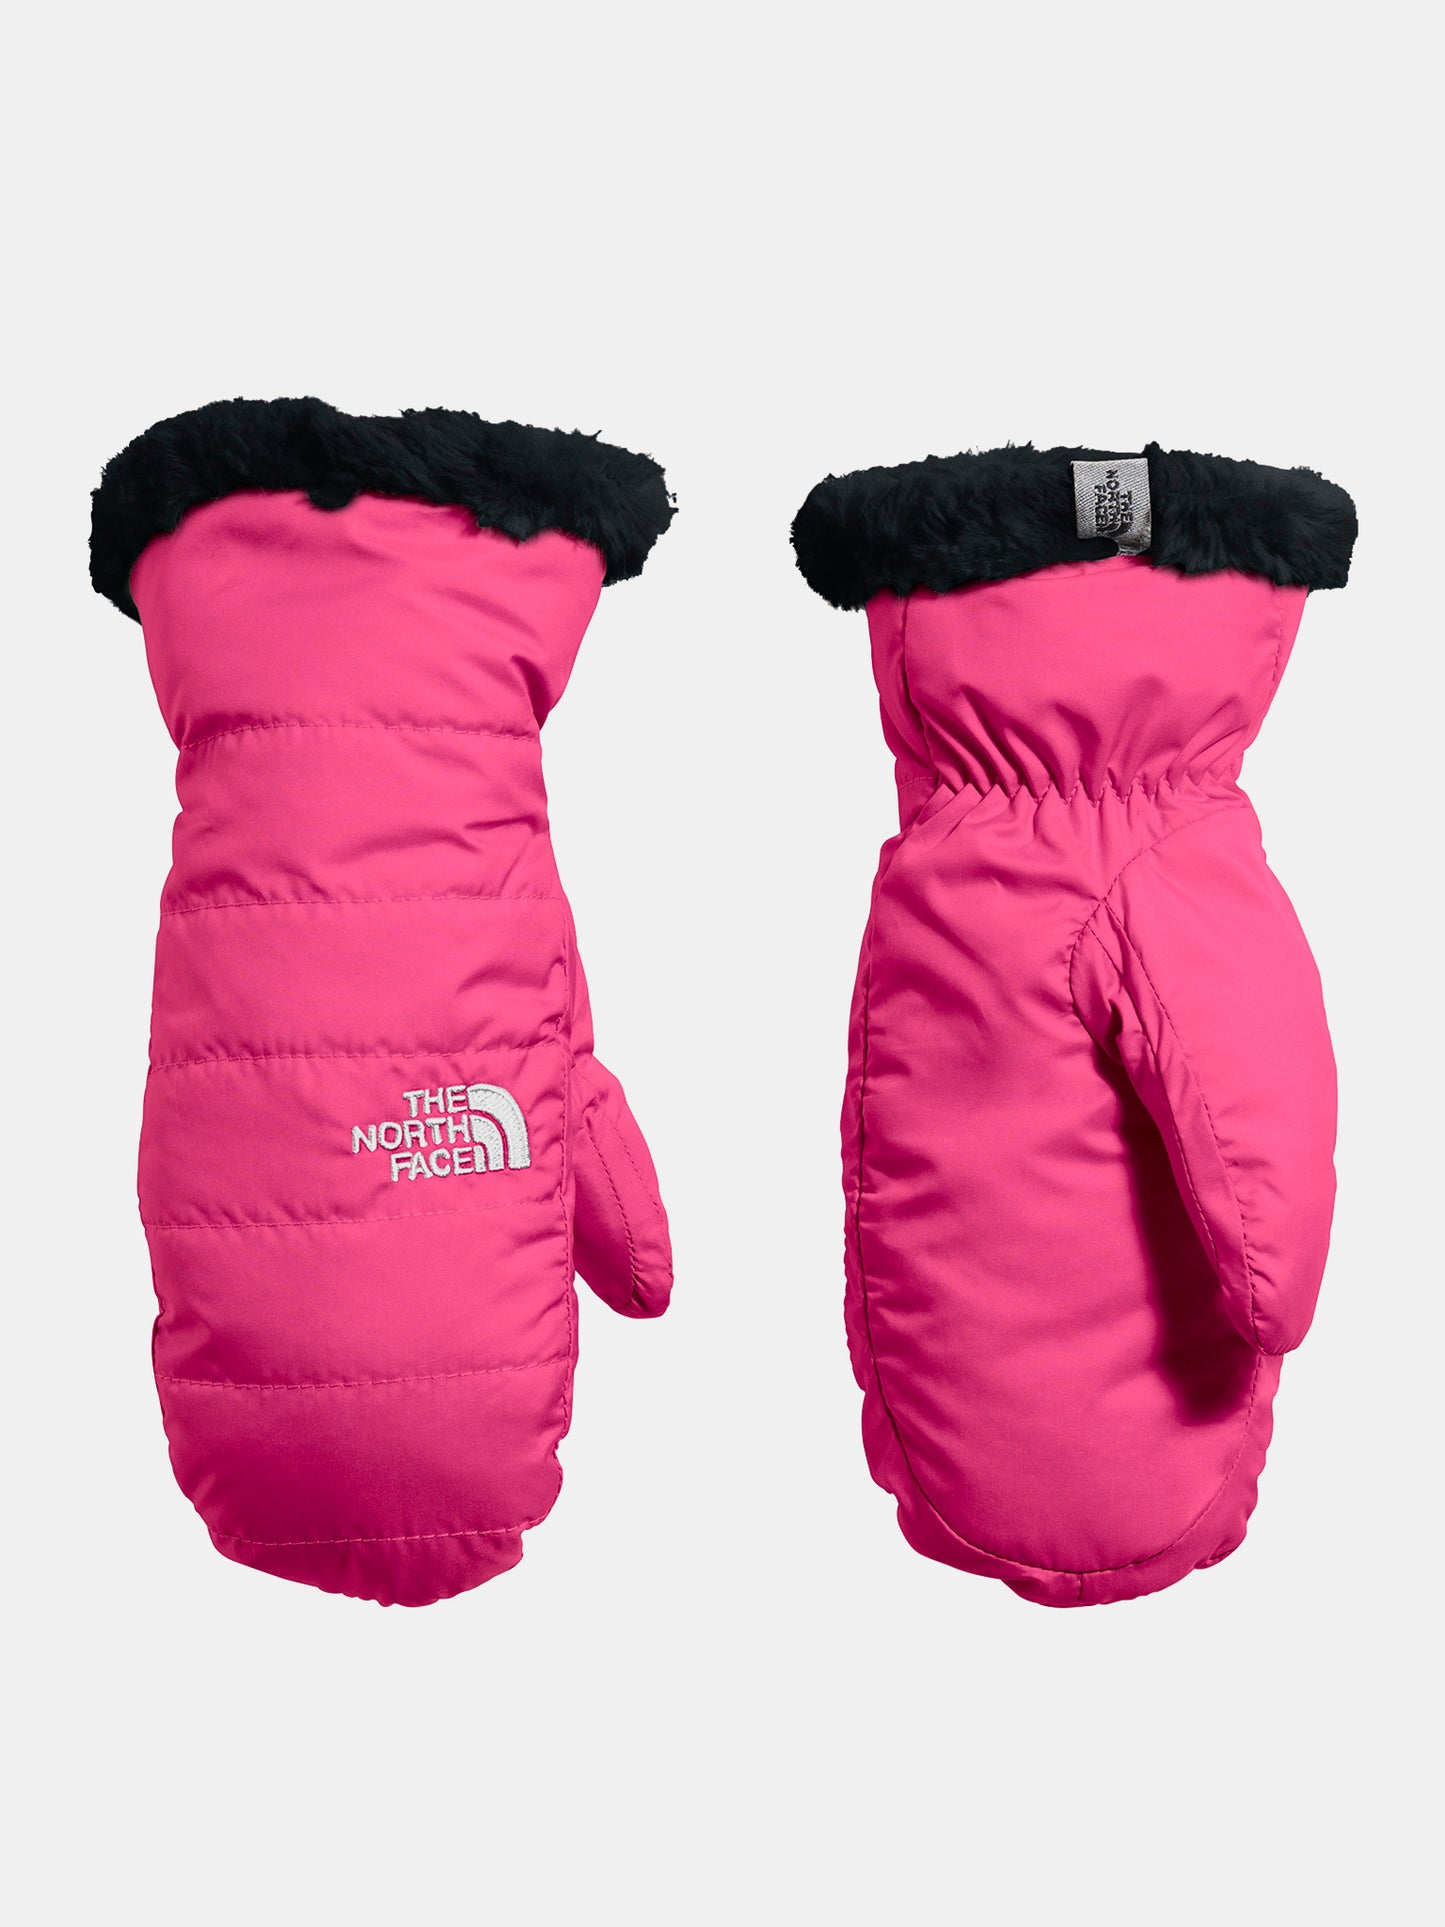 The North Face Girls' Reversible Mossbud Swirl Mitts